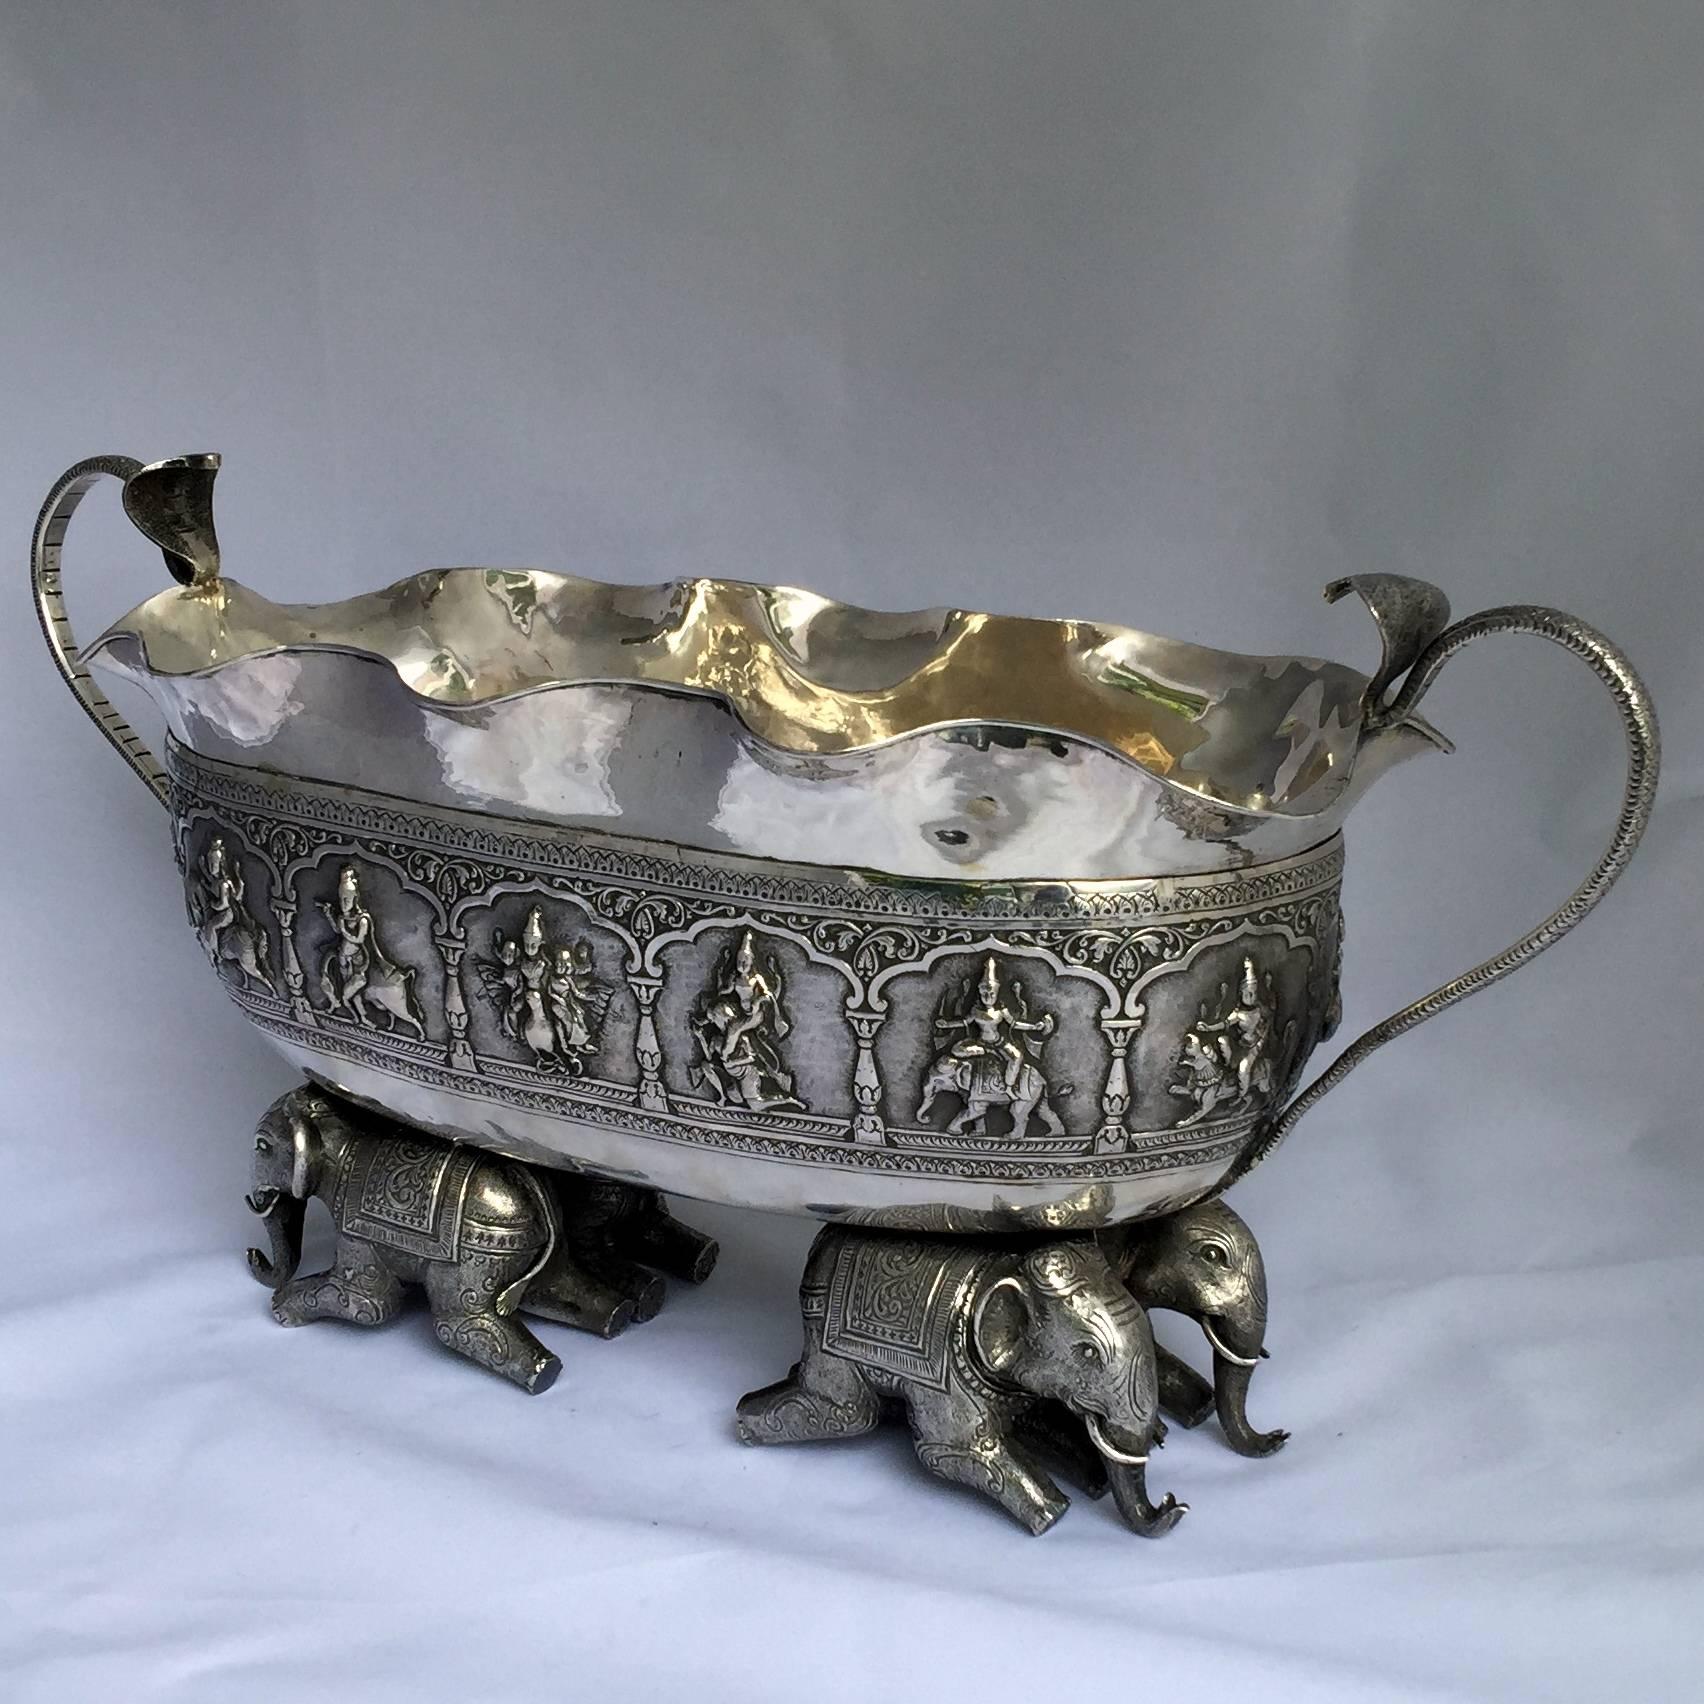 An exceptionally heavy sterling silver Jardiniere from Madras, Southern India. Dating from the last quarter of the 19th century this wonderful piece must have been specially crafted for a member of the British Raj. The caparisoned solid silver